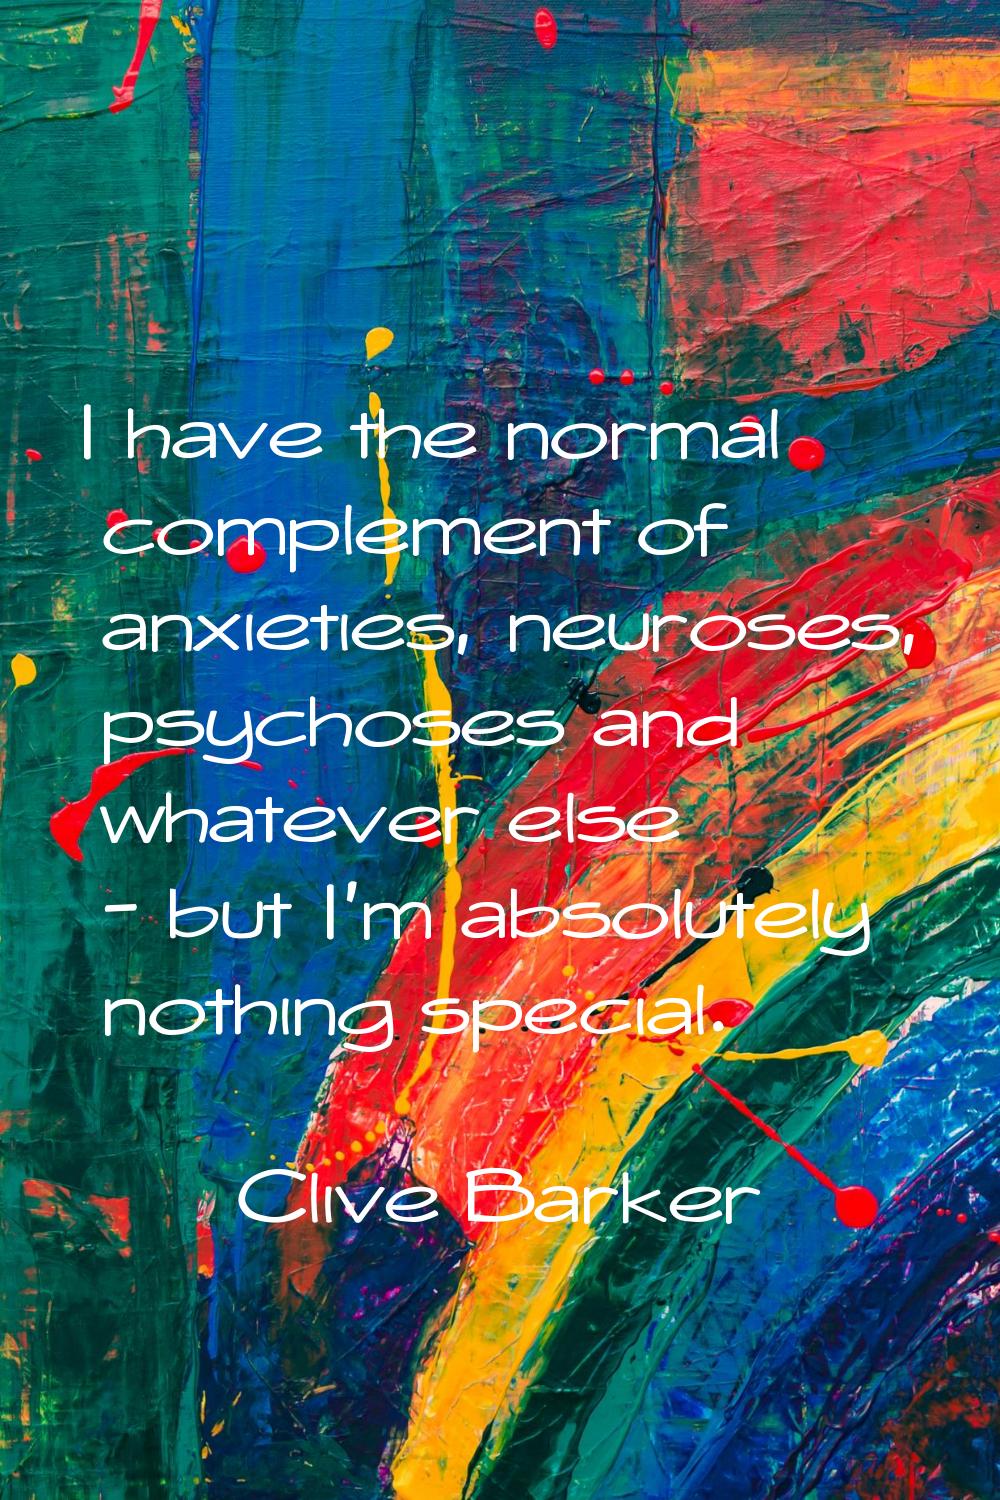 I have the normal complement of anxieties, neuroses, psychoses and whatever else - but I'm absolute